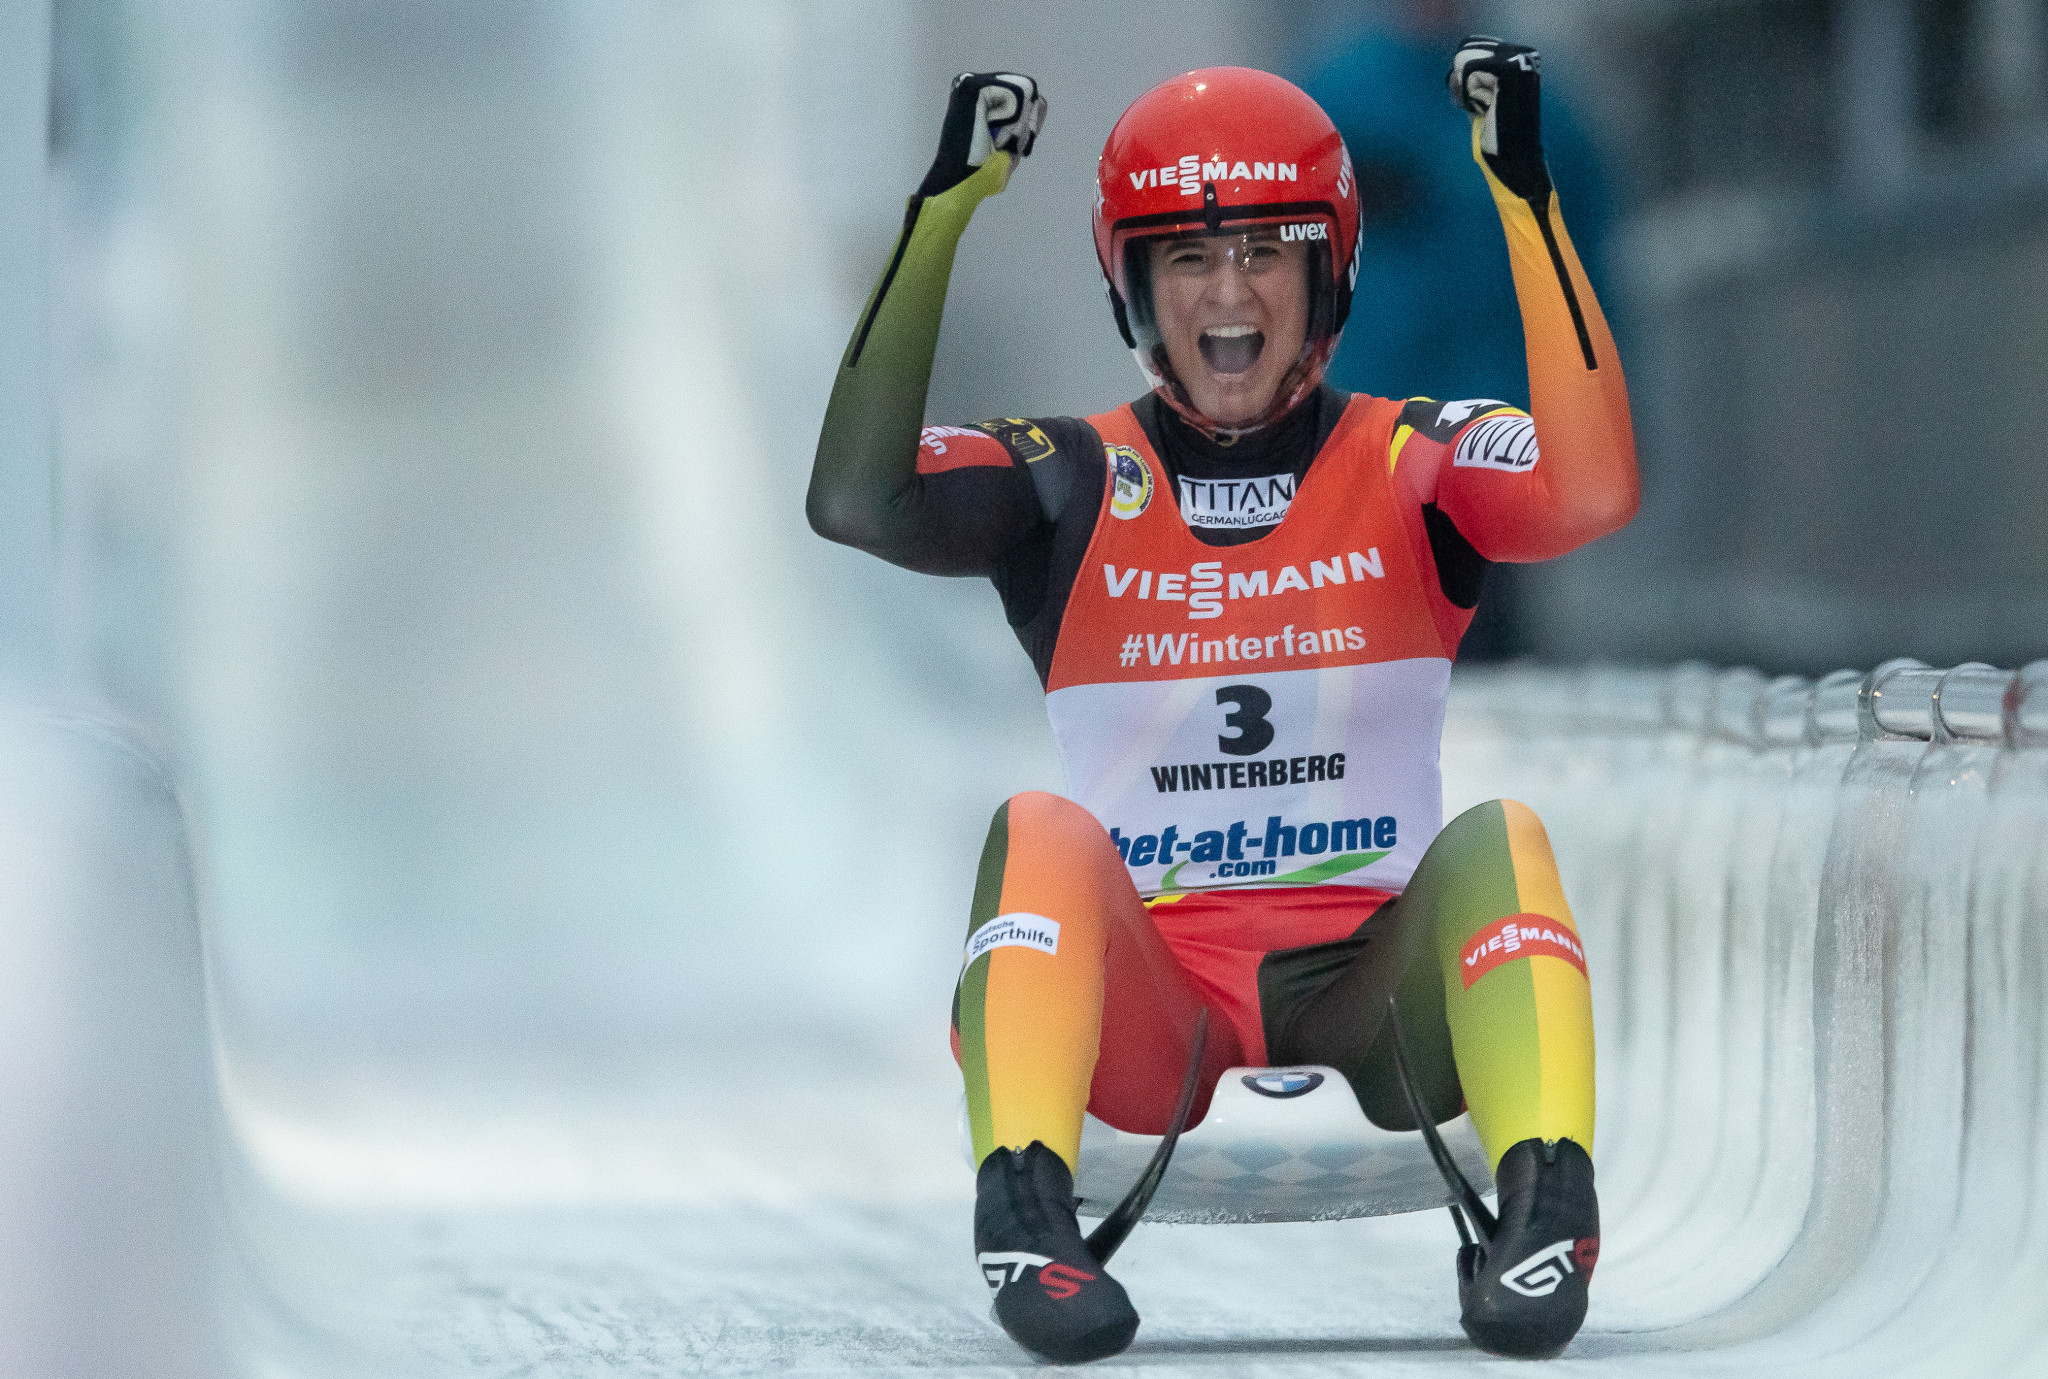 Germany's Natalie Geisenberger is returning to FIL World Cup action after winning the fourth world title of her career ©Getty Images